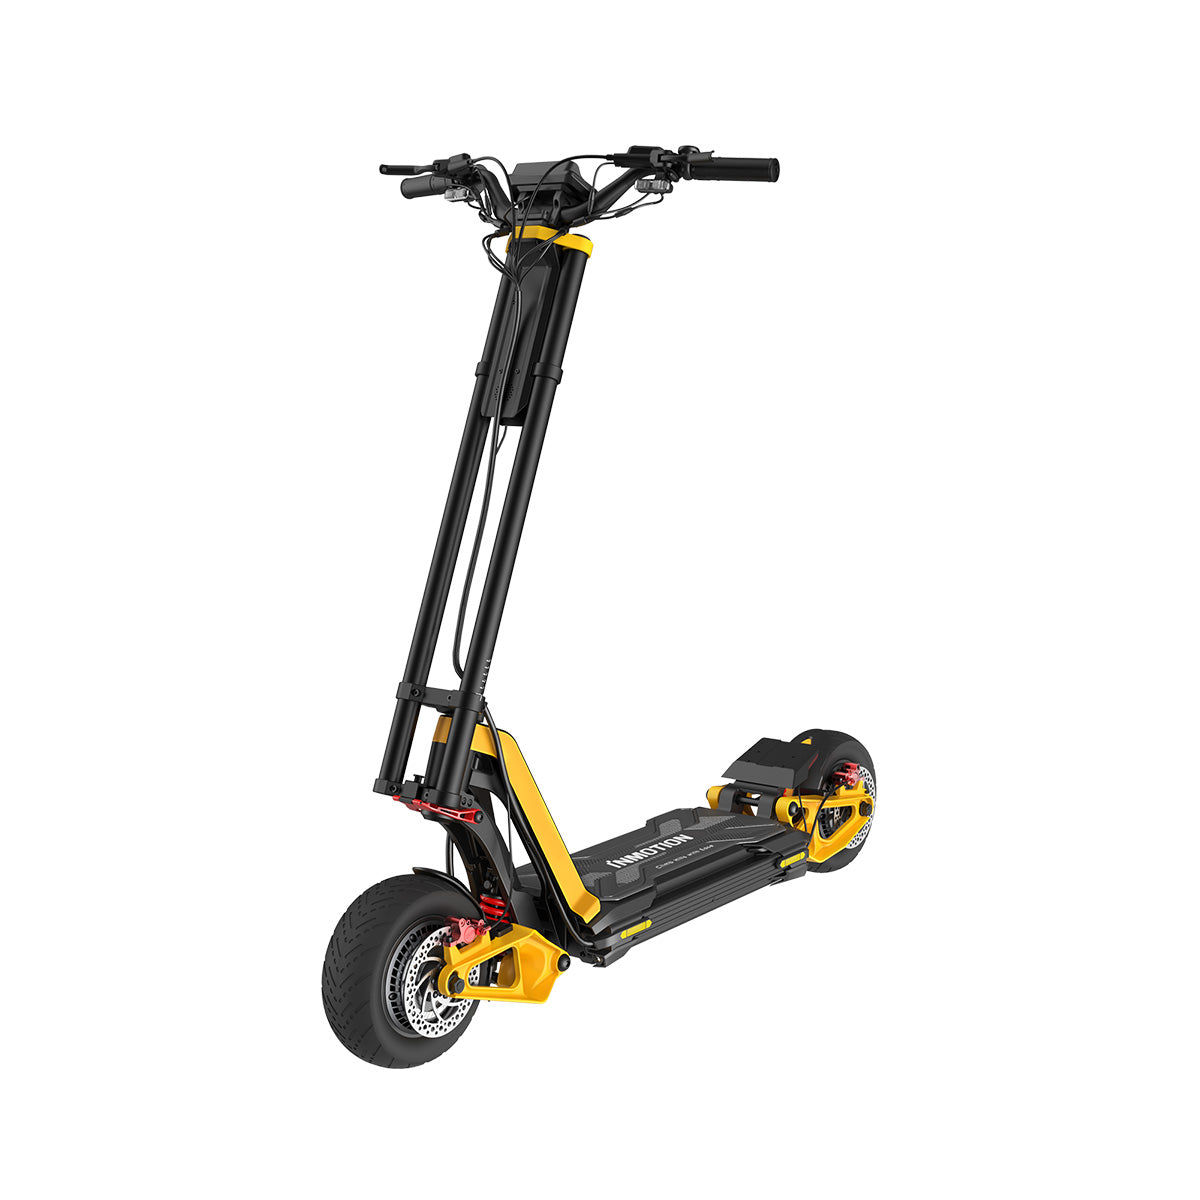 EZbike Canada : InMotion RS Super Scooter